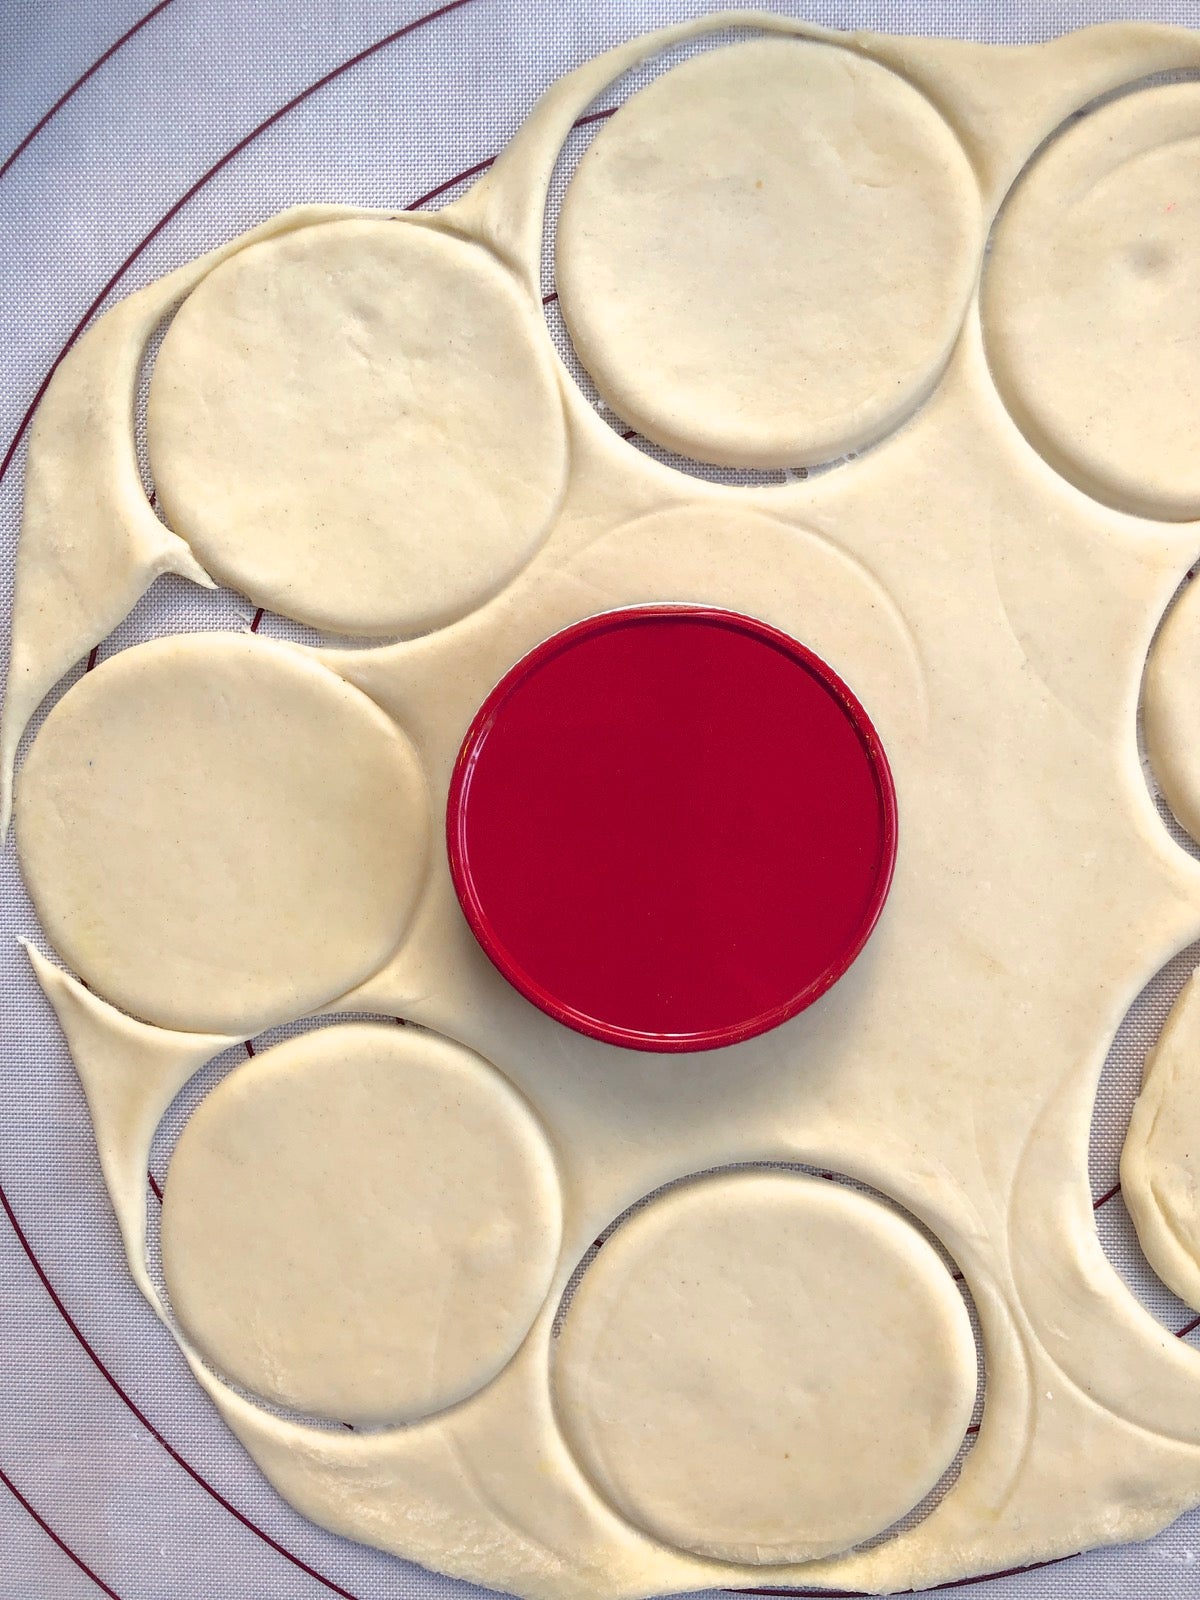 Pierogi dough rolled into a circle, and smaller circles being cut from the dough with a jar lid.